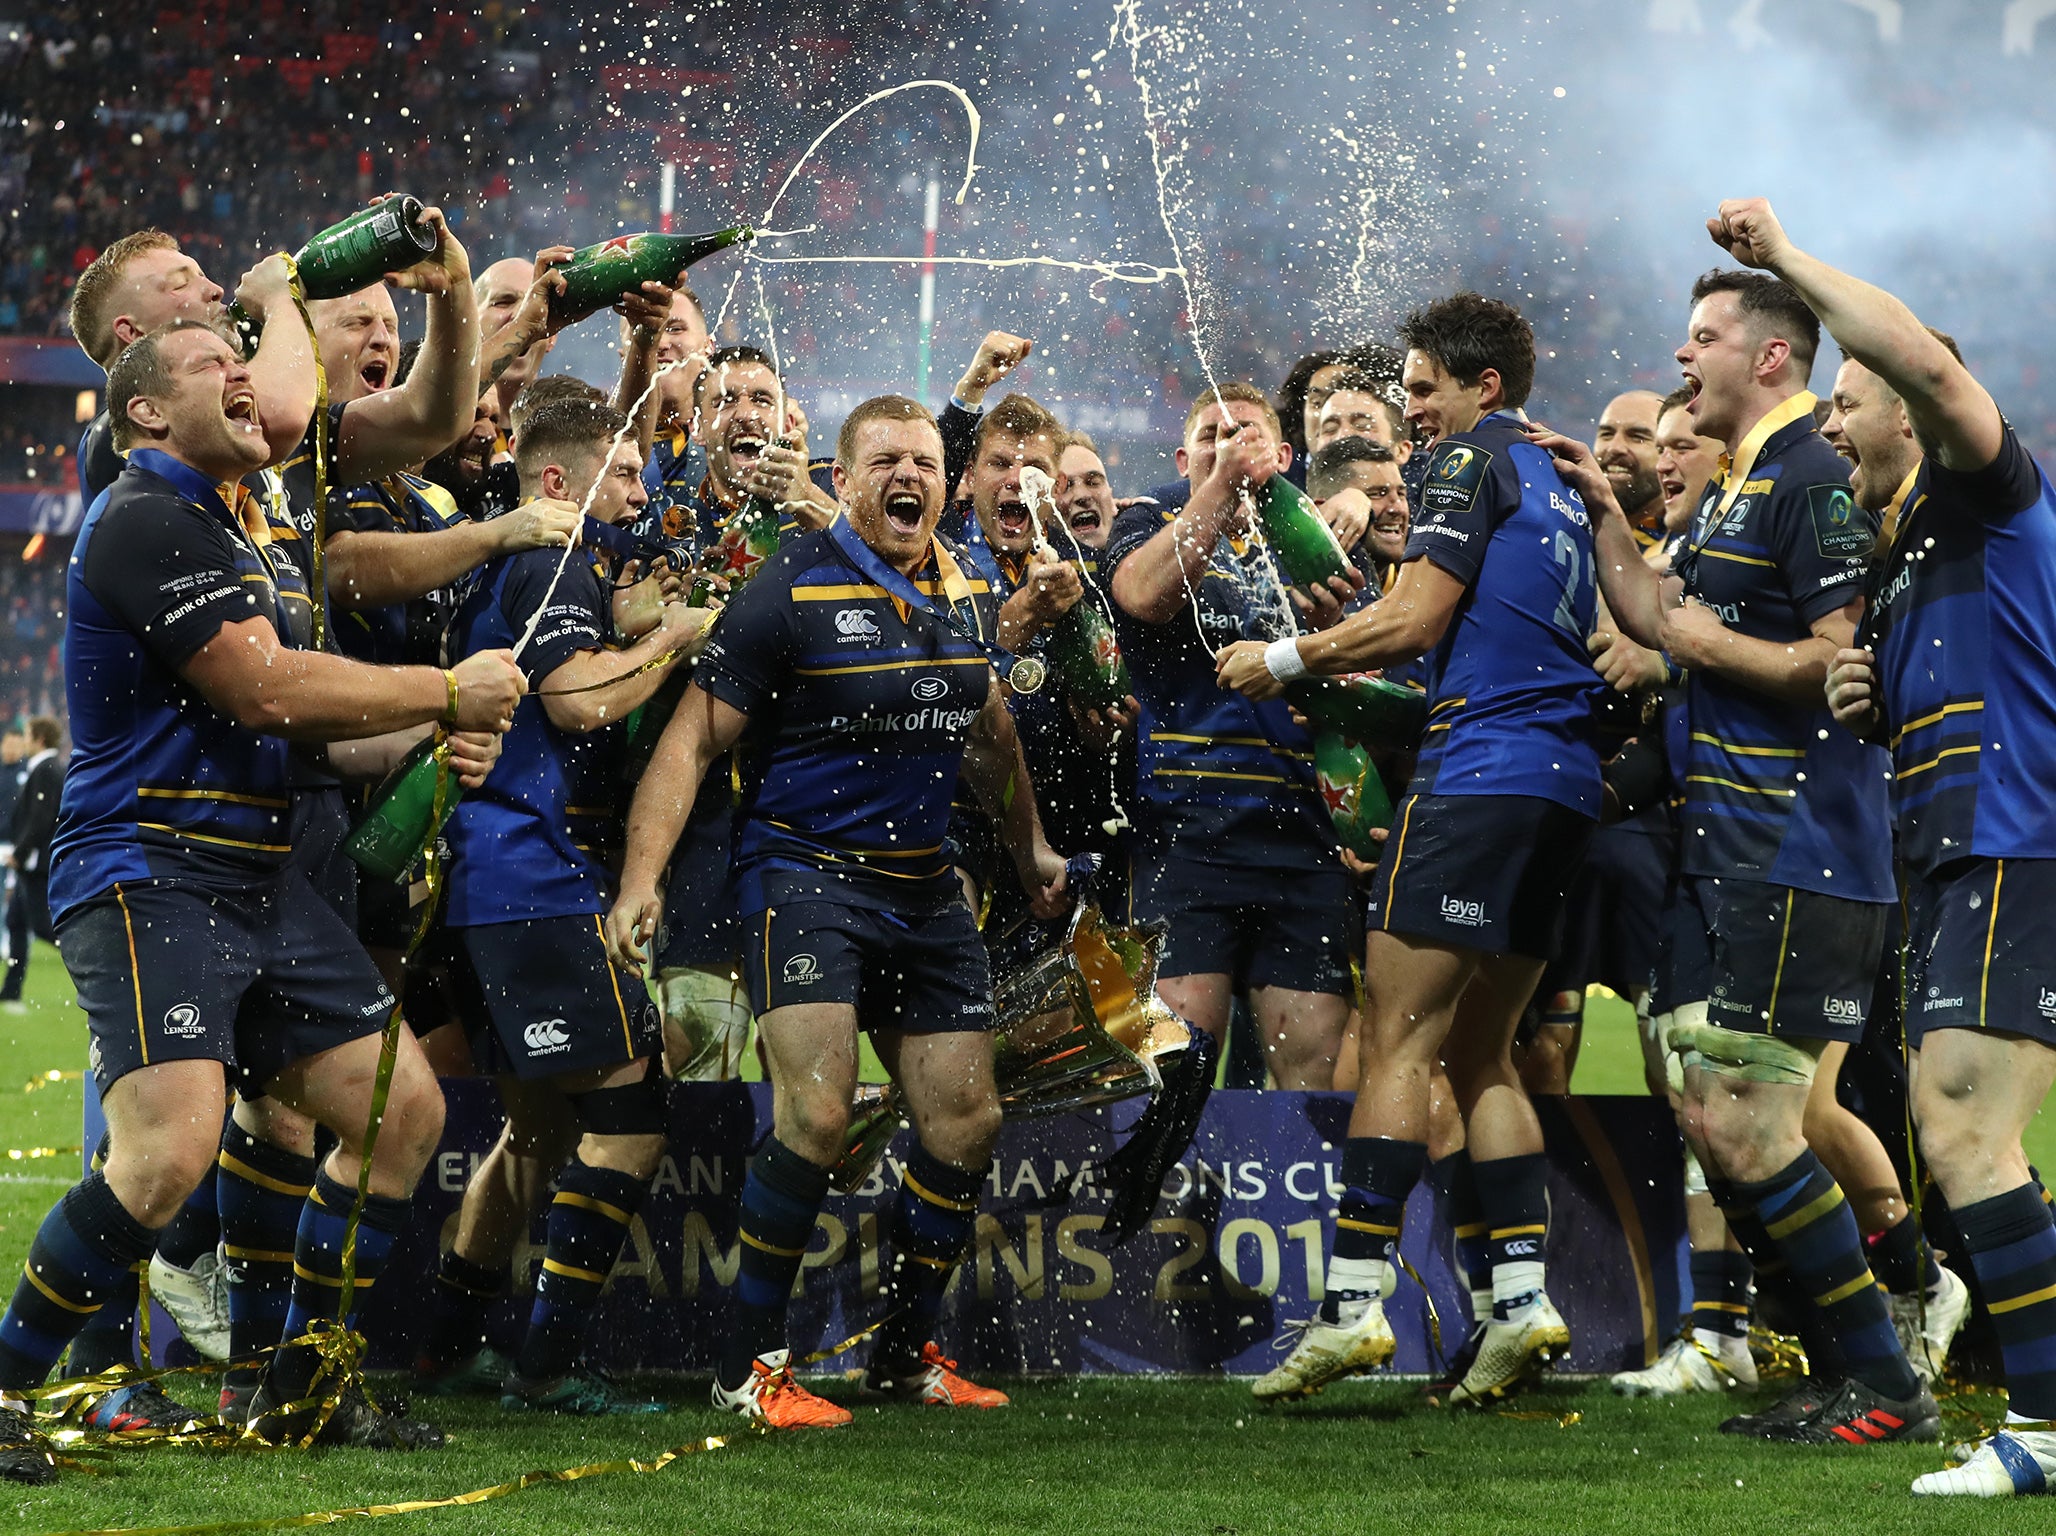 It has been a brilliant season for Irish rugby